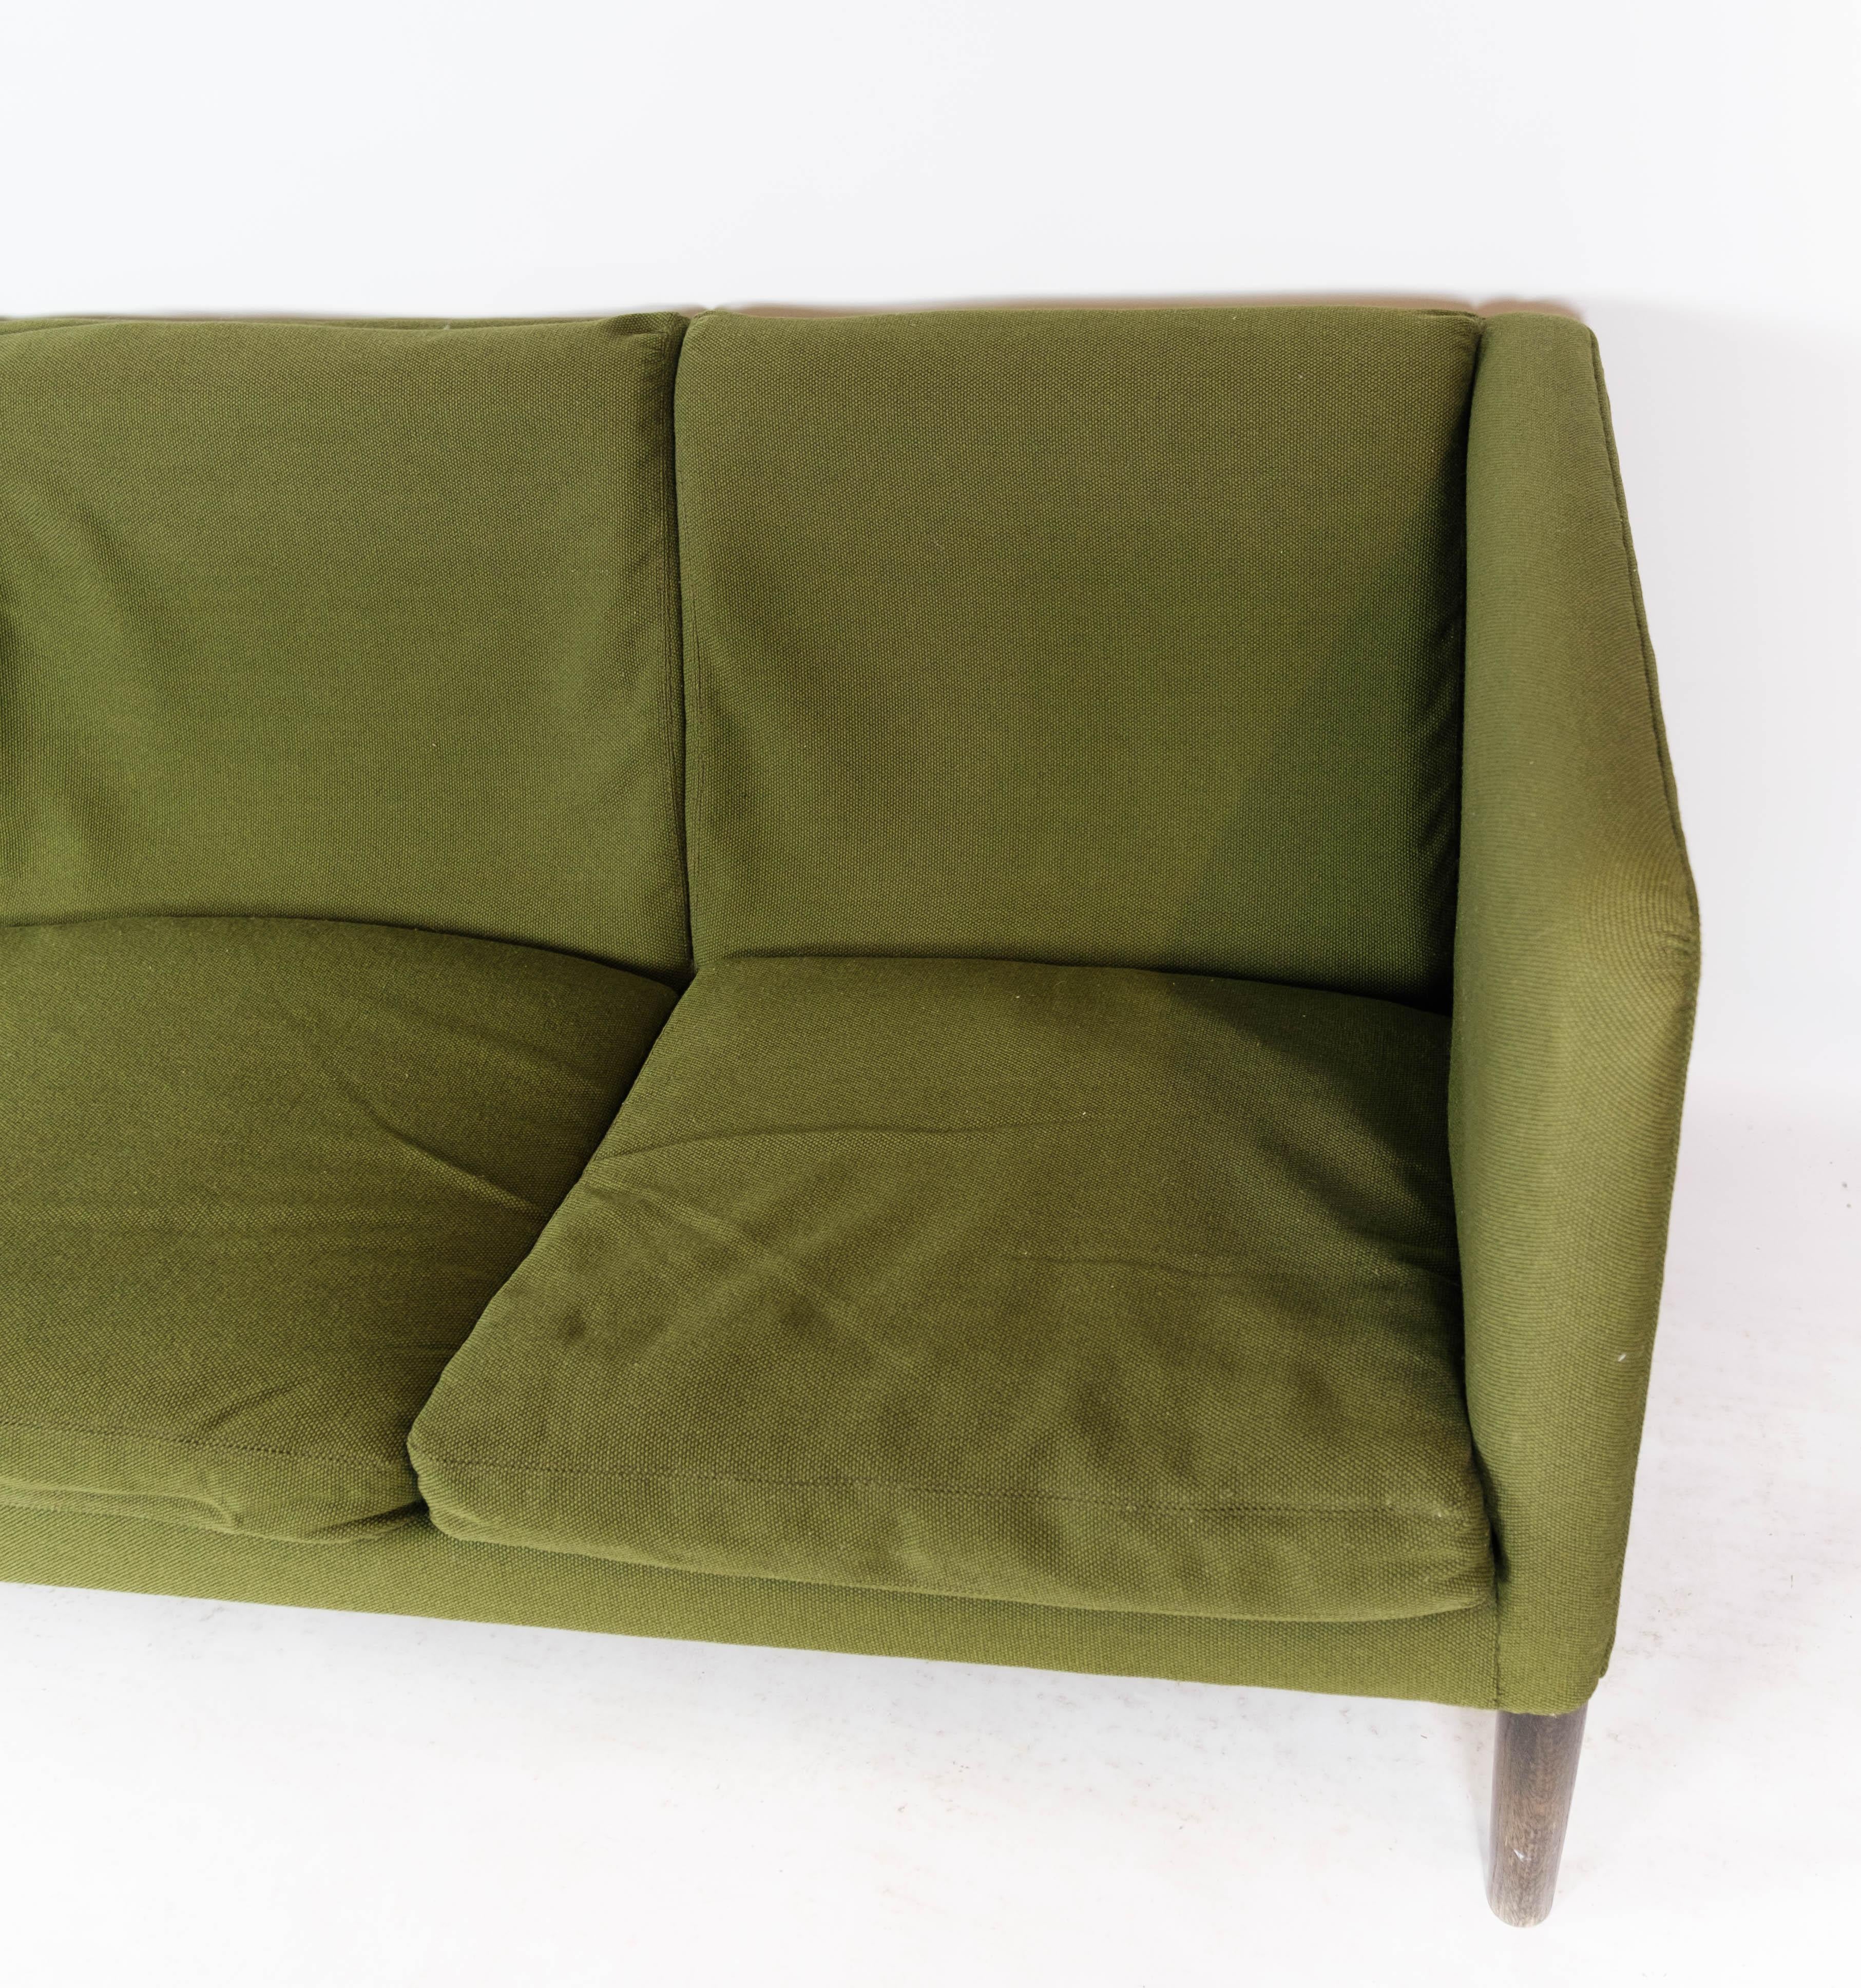 The three-seater sofa, Model AP 18S, upholstered in green wool fabric and with dark wood legs, was designed by the Danish architect Hans J. Wegner in 1960. Wegner, known for his unique contribution to Danish furniture design, created this sofa with